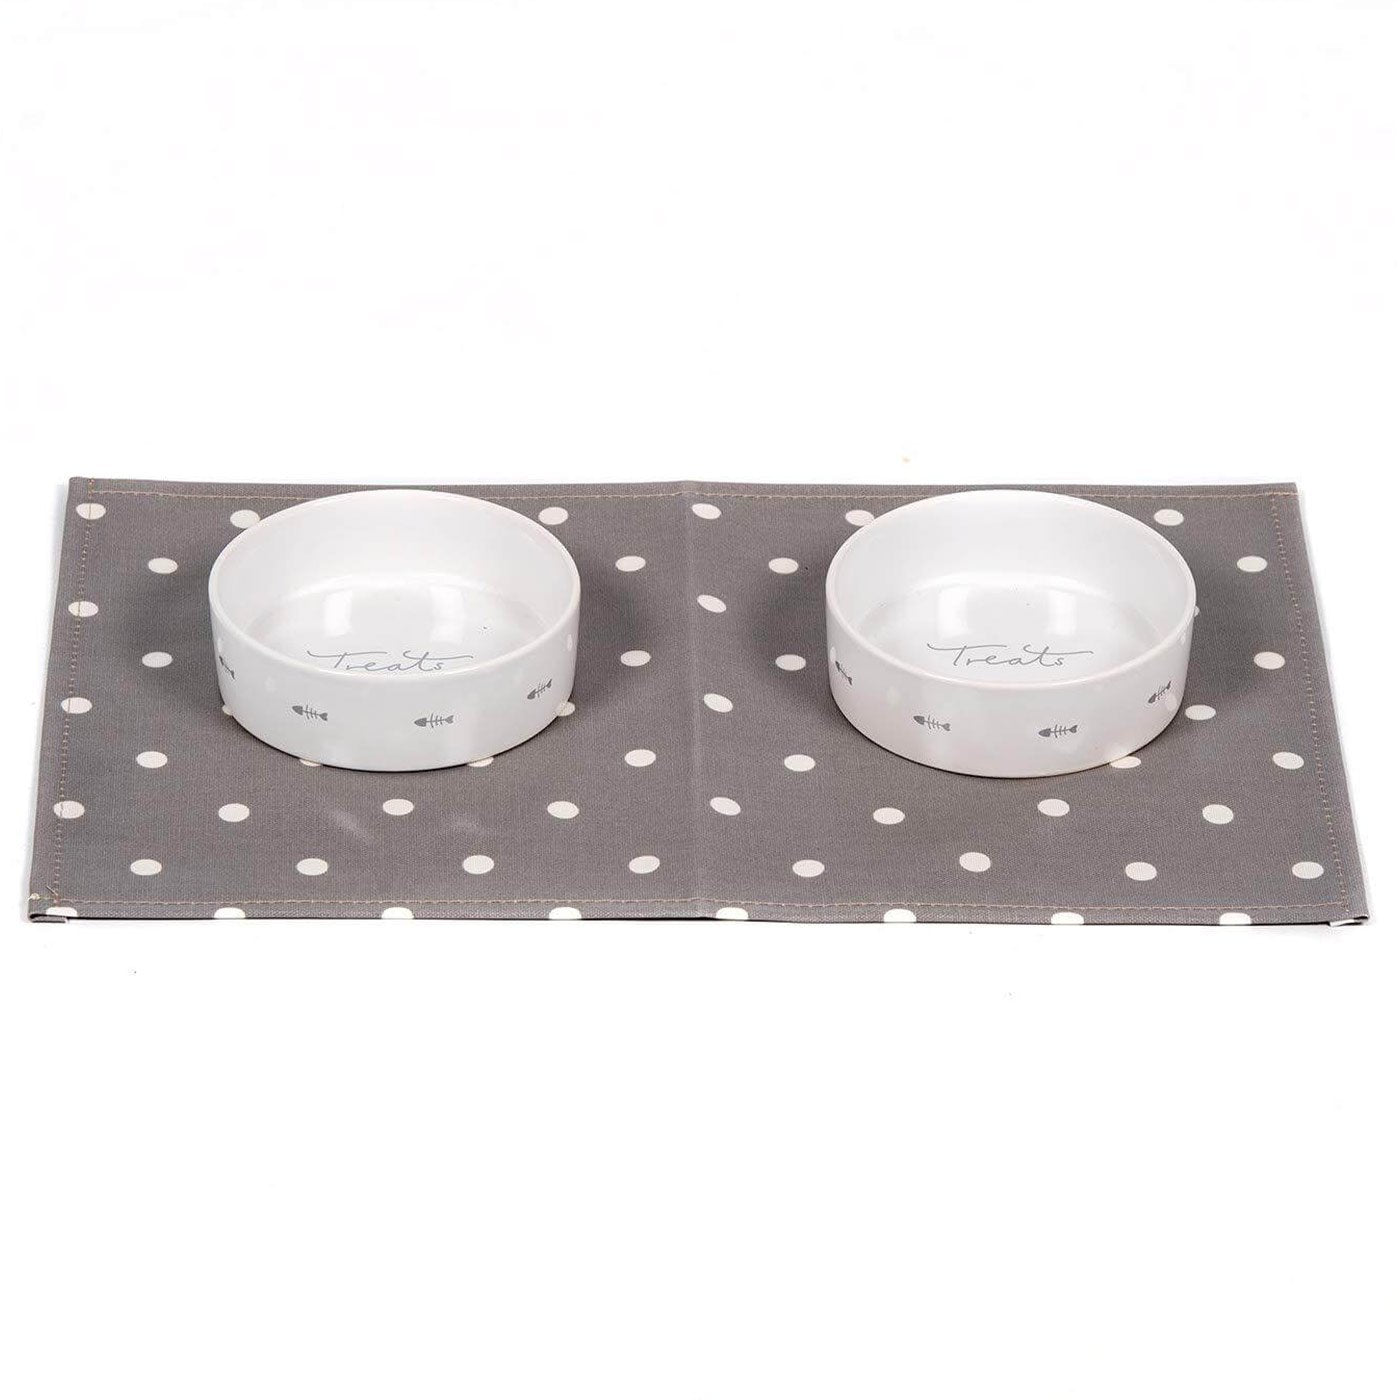 [color:grey spot] Discover Pet Feeding Placemat in Grey Spot. Available at Lords and Labradors US